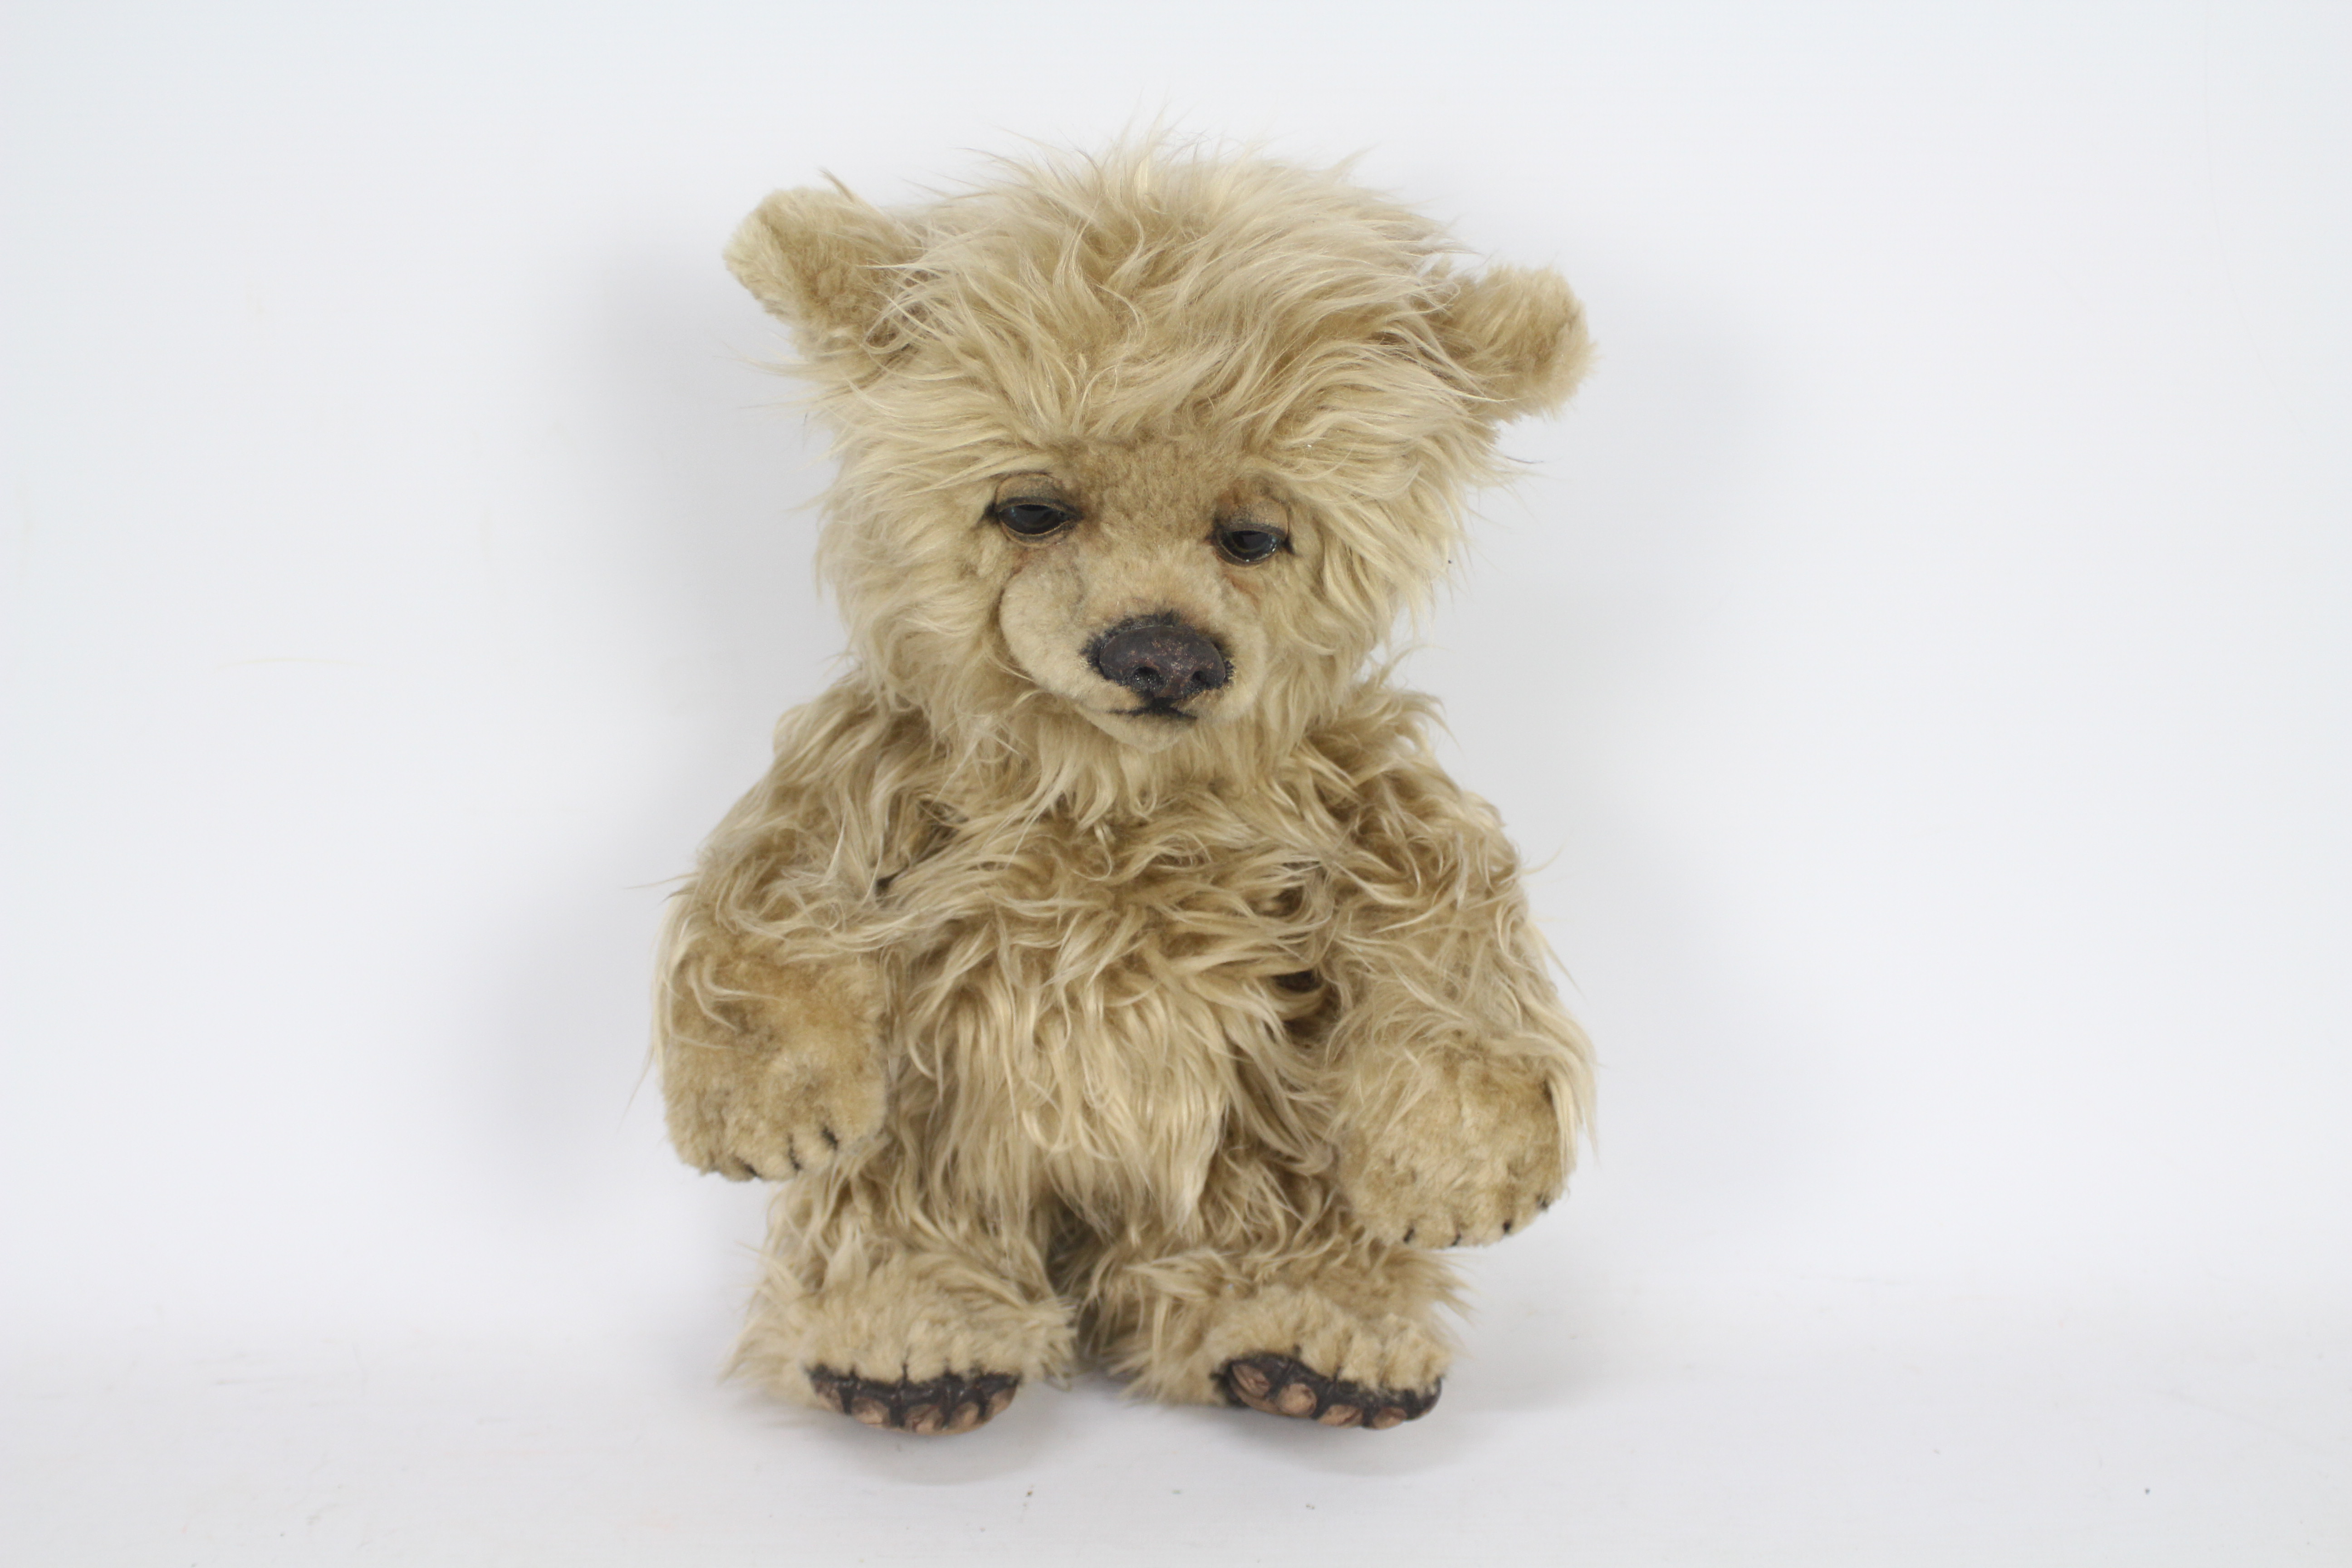 Melisa's Bears - A one of a kind golden faux fur bear named Lizzie made by the Canadian company